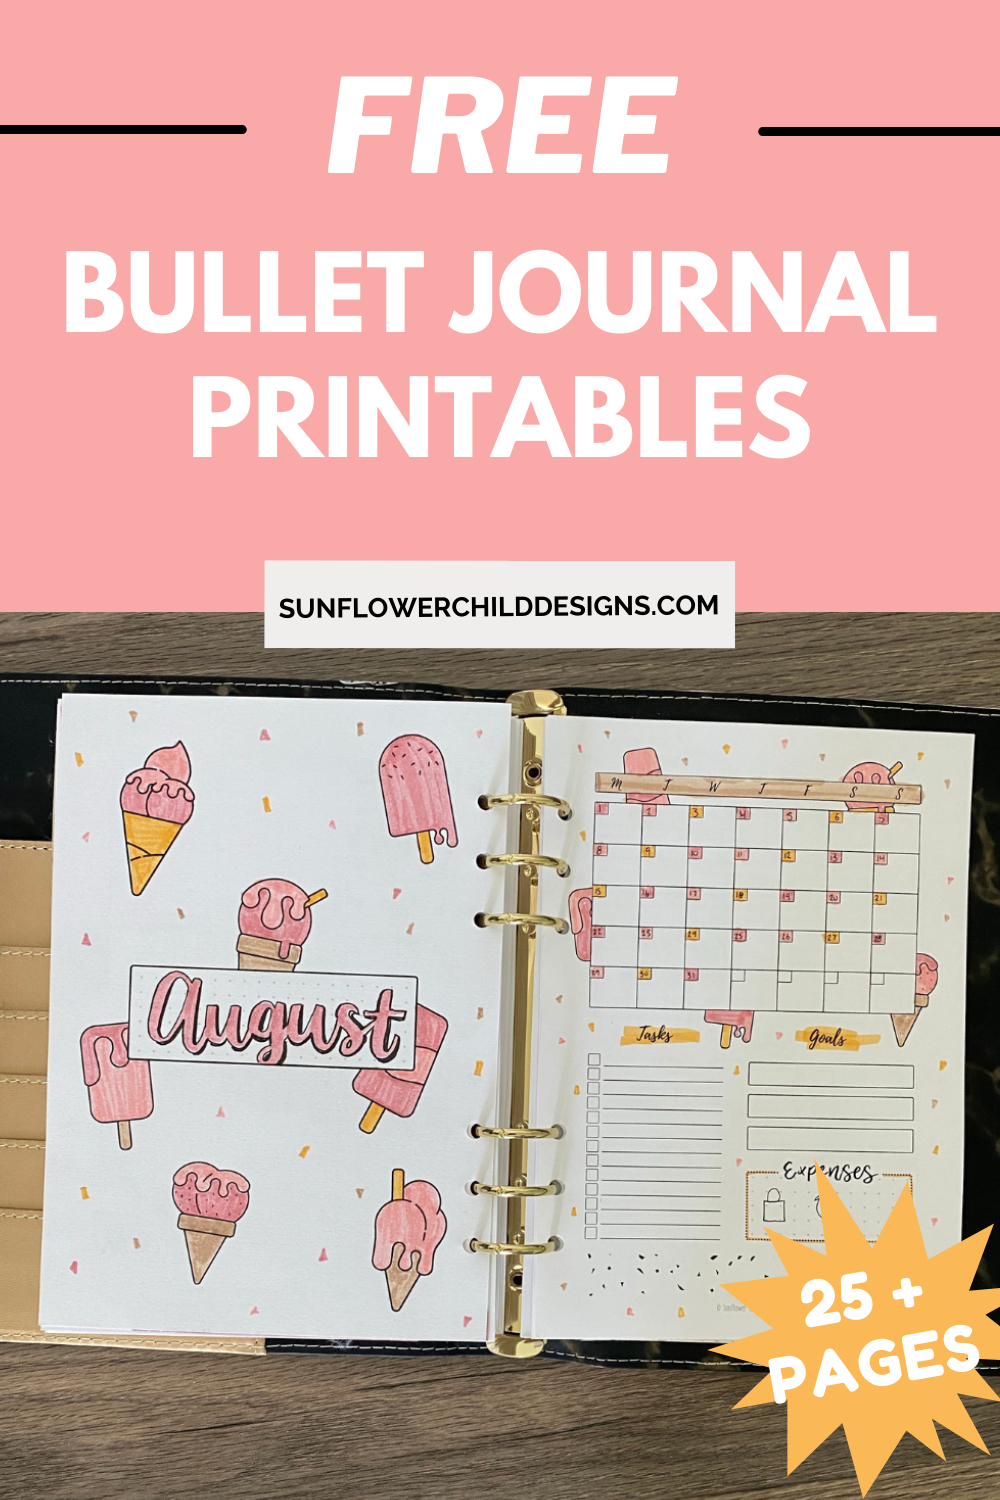 Free Bullet Journal Printables 25+ Pages With Doodles — Sunflower intended for Free Bullet Journal Printables